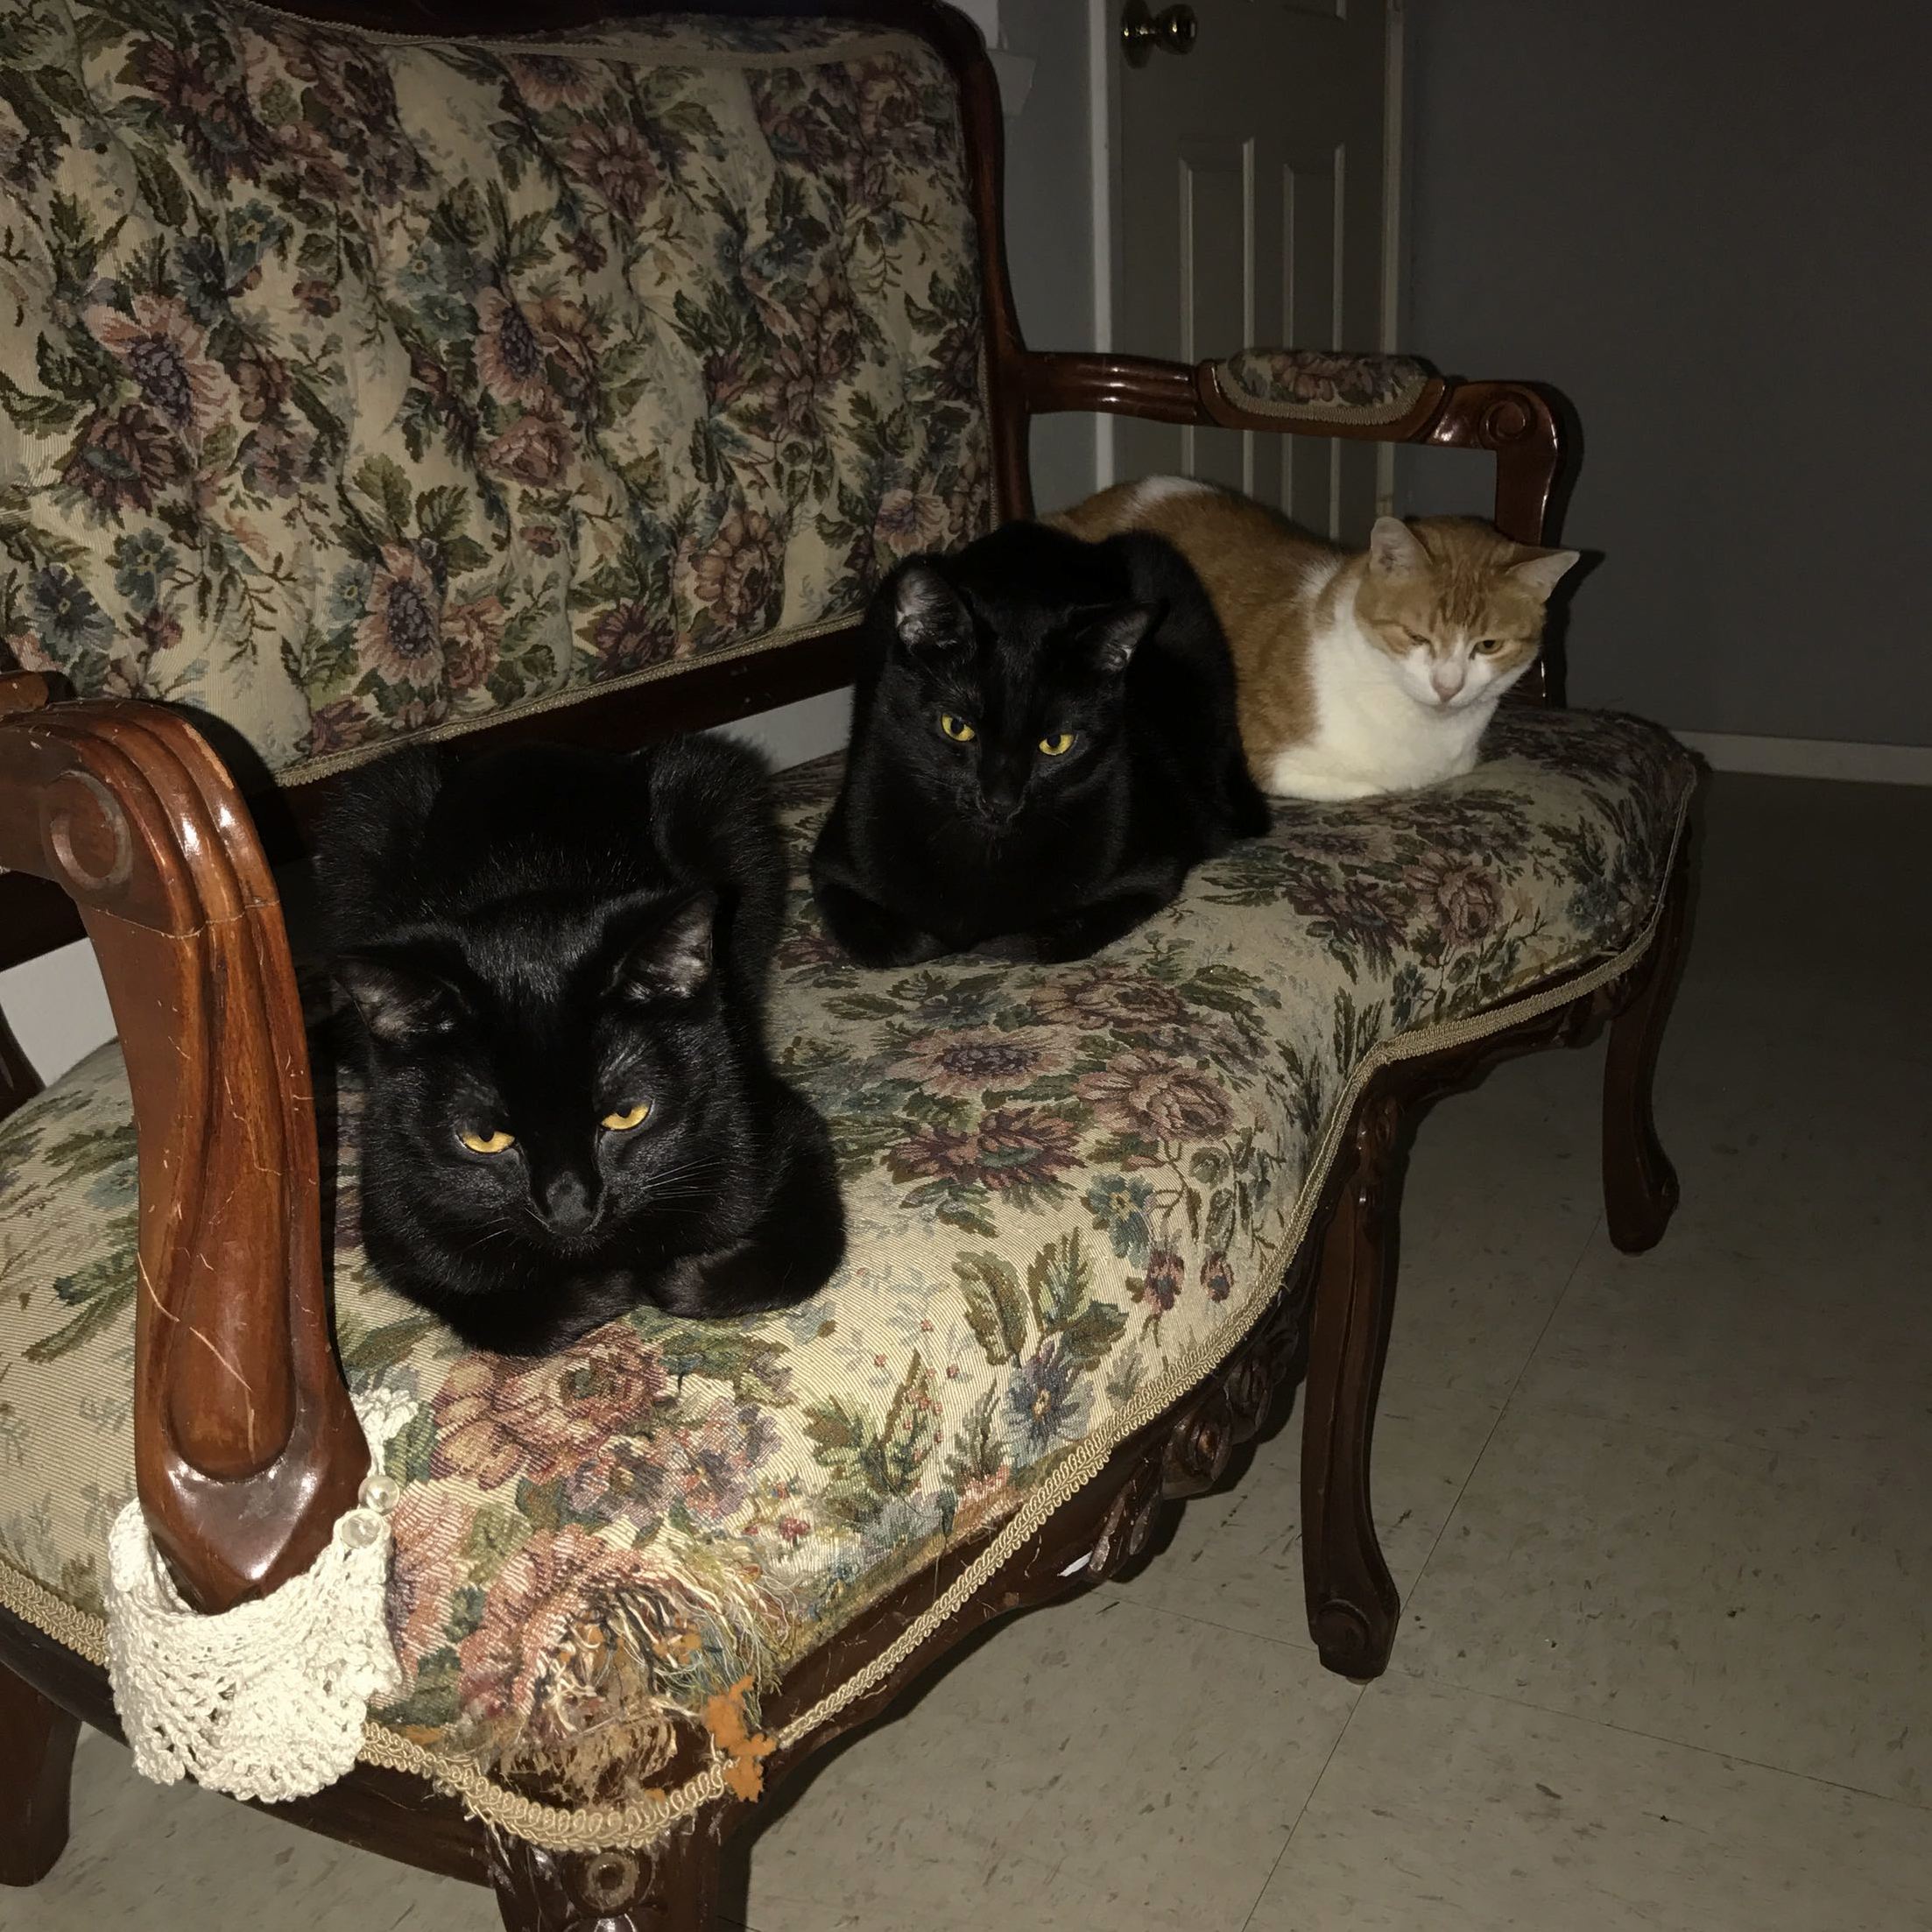 The three muscateers